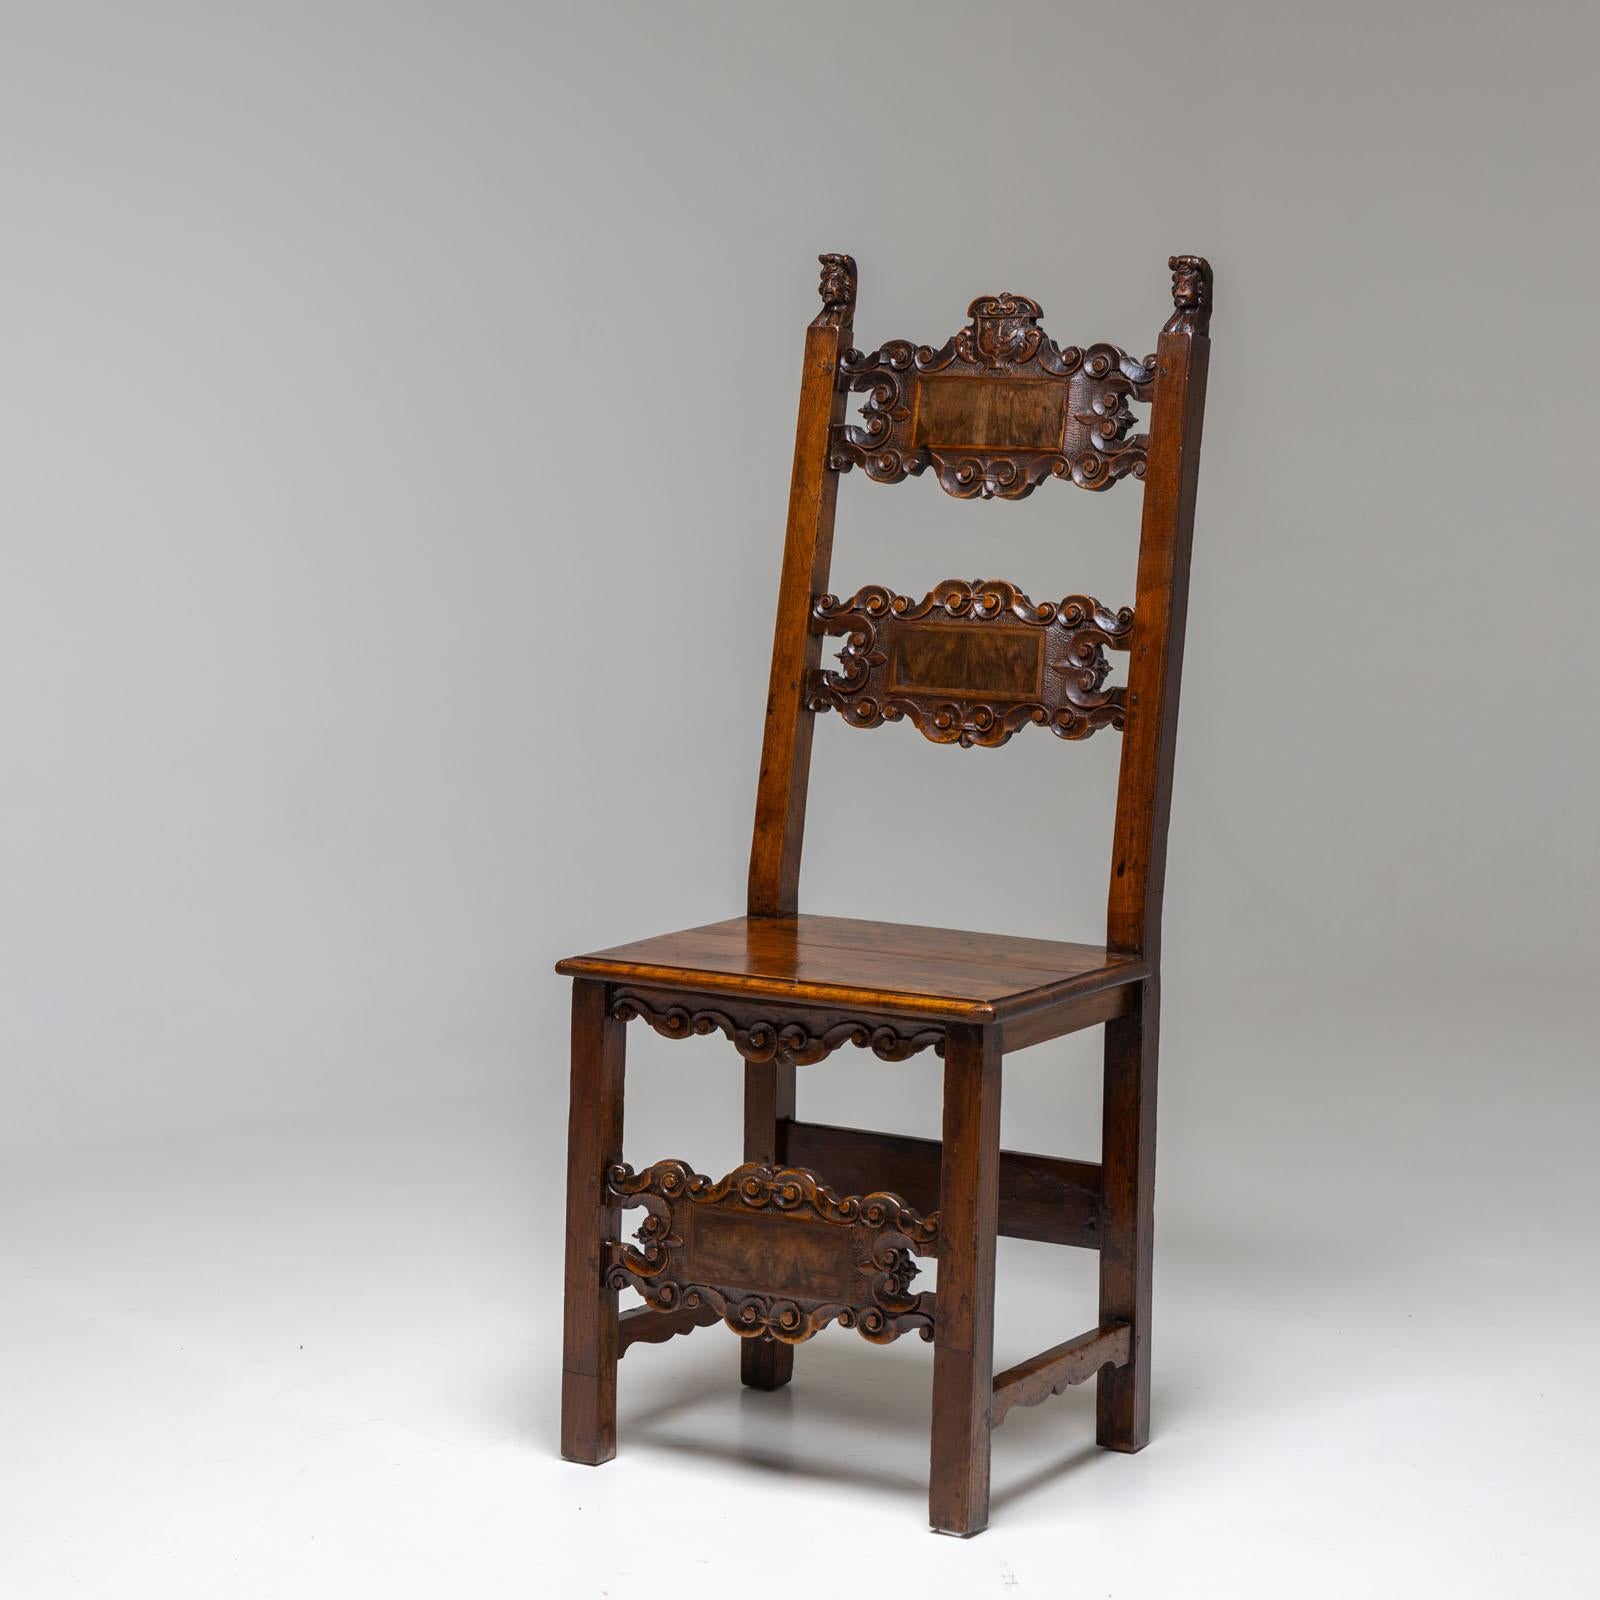 Side Chair made of solid walnut with carved pinnacles in the shape of small busts and volute-decorated intermediate struts on the backrest and front legs. A carved coat of arms cartouche (three stars above a sword arm) crowns the back of the chair.